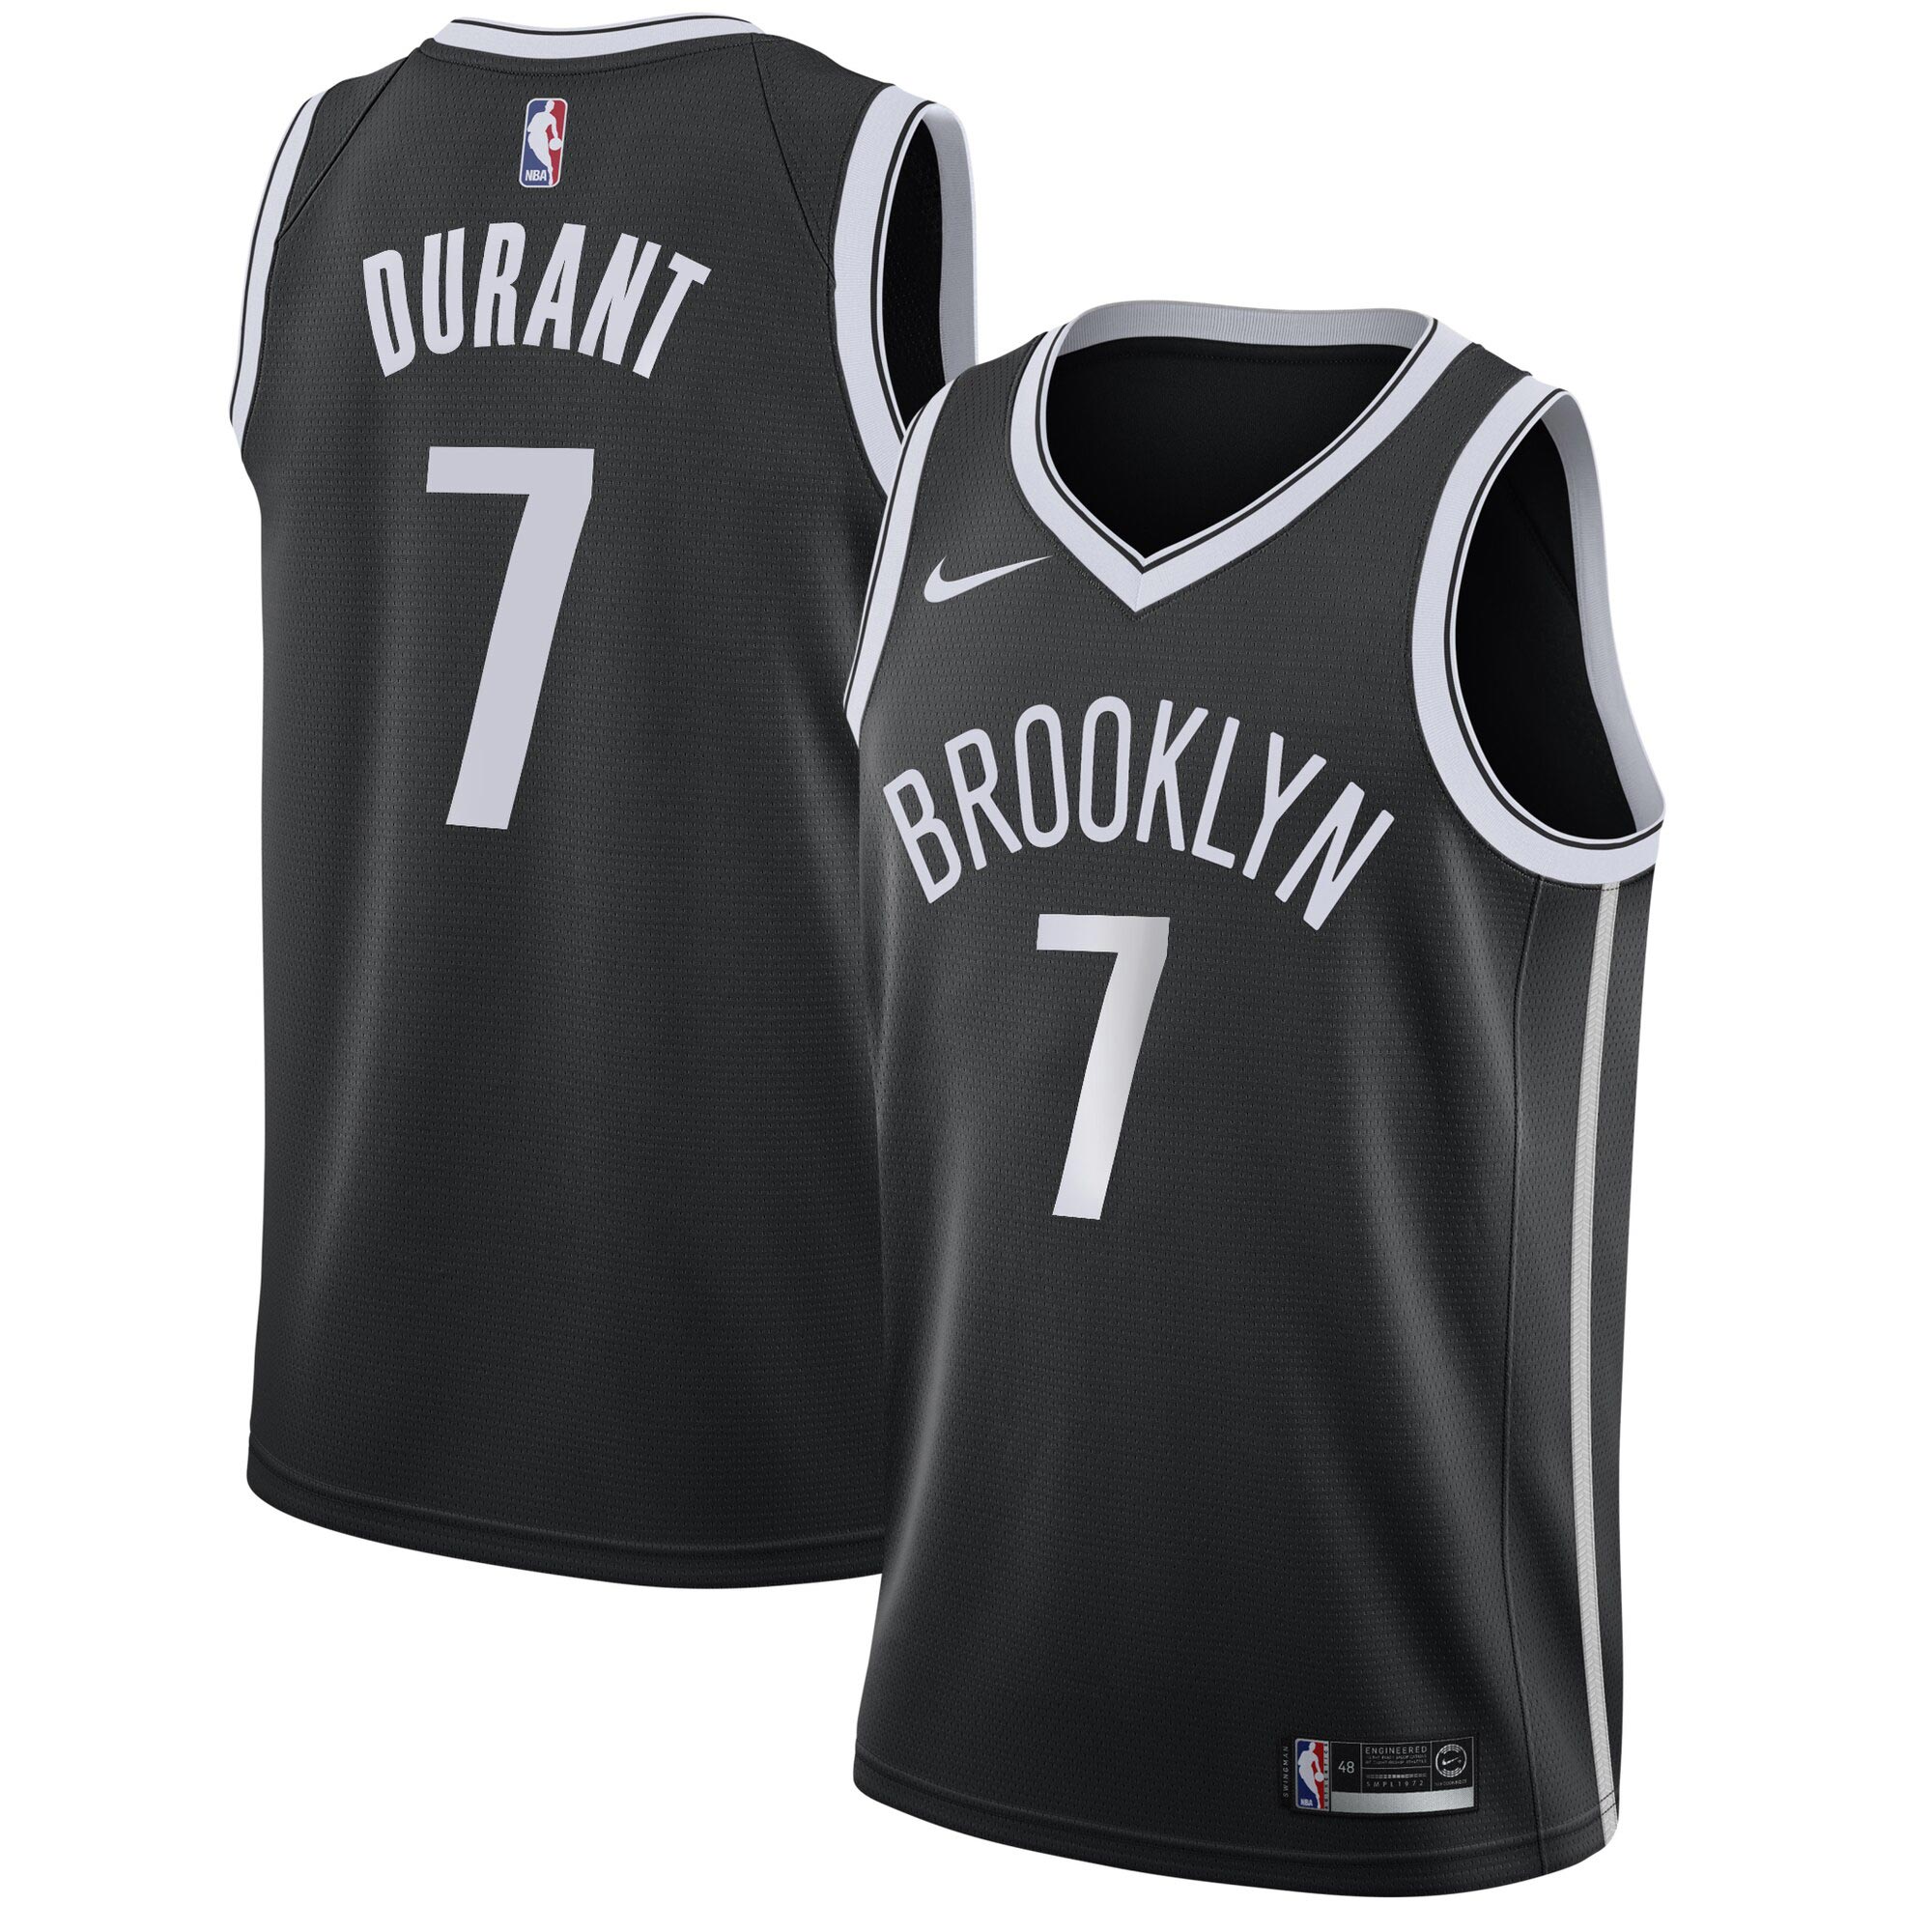 kevin durant jersey number